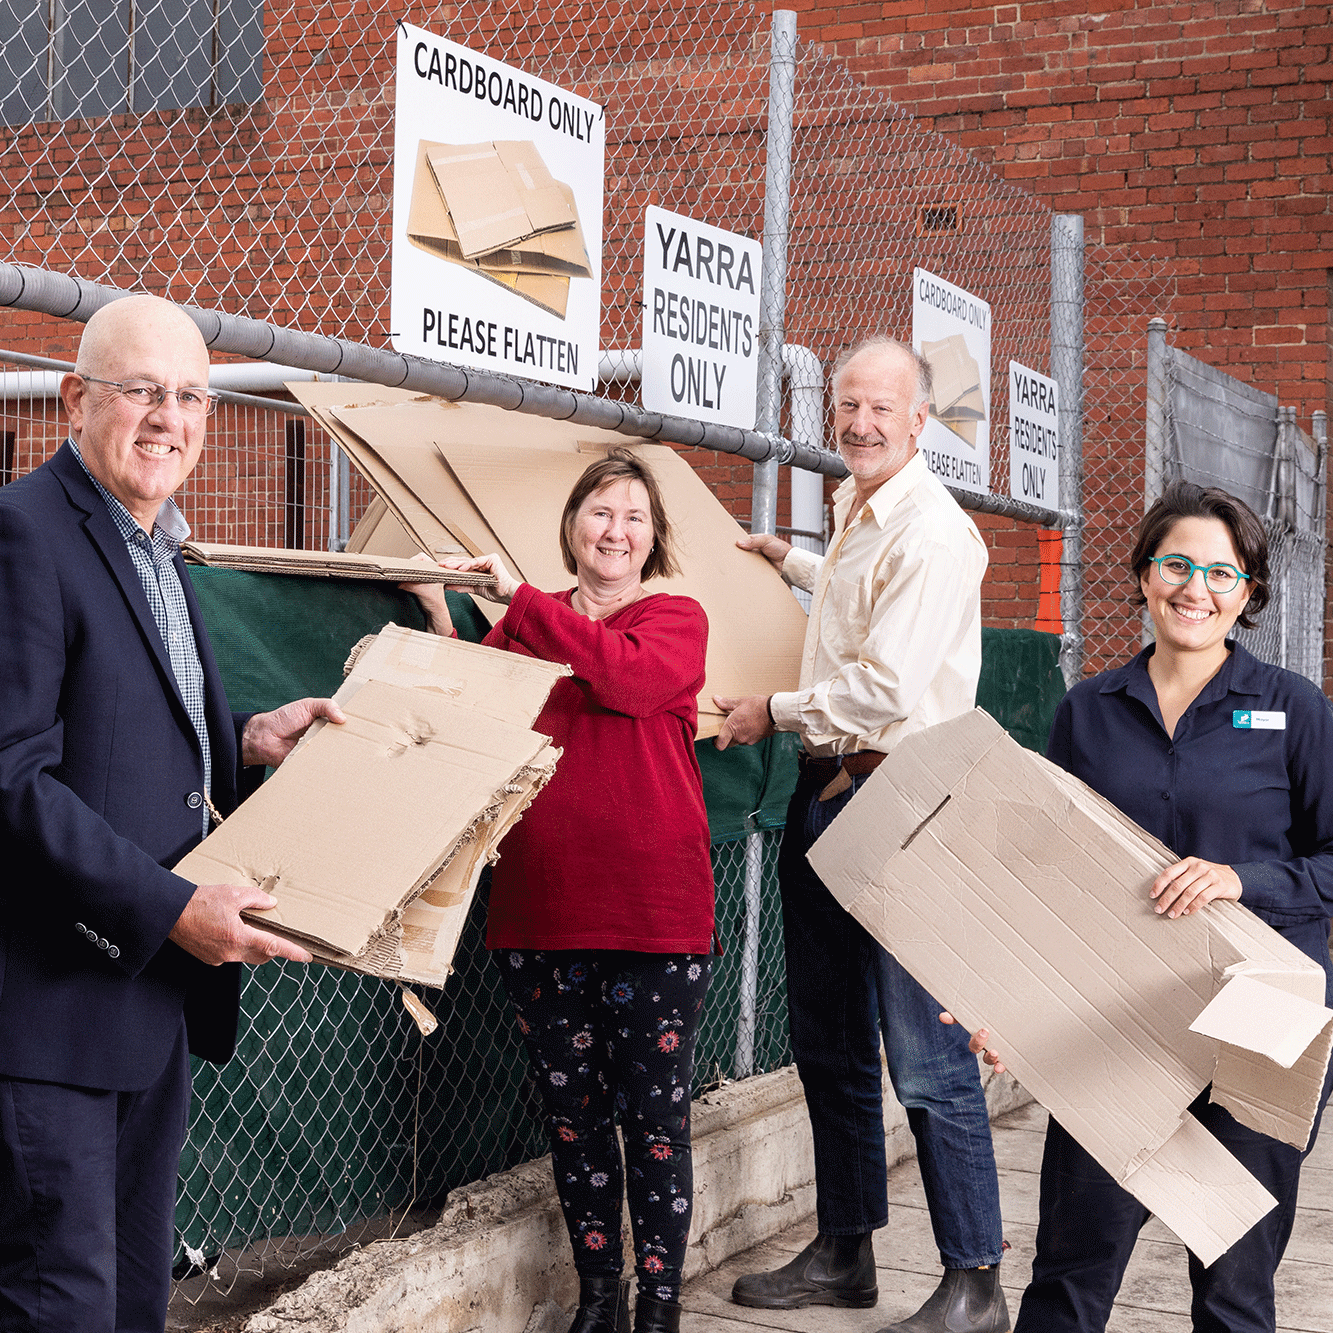 Four people holding flattened cardboard stand in front of bins and signs for cardboard recycling